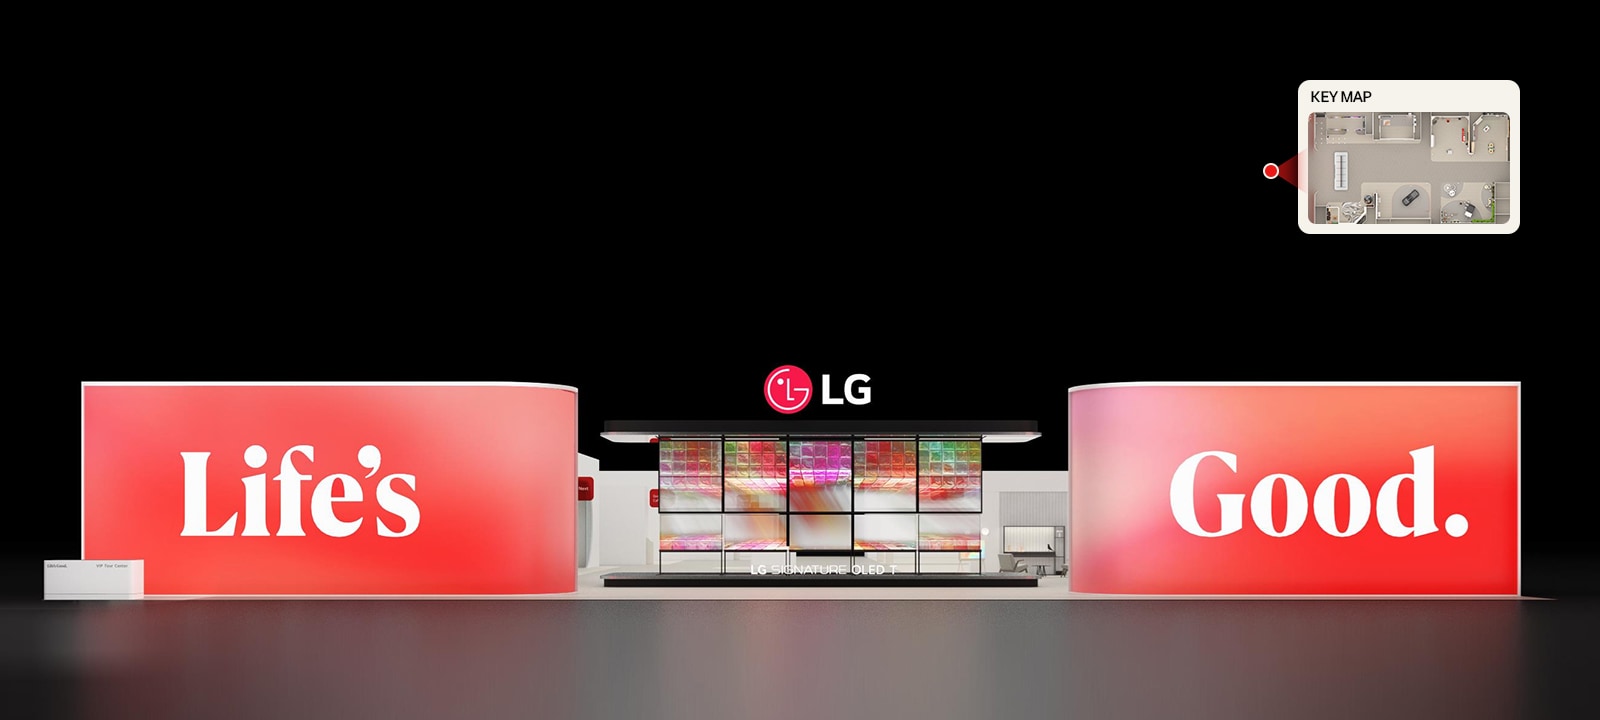 LG wall image of CES booth